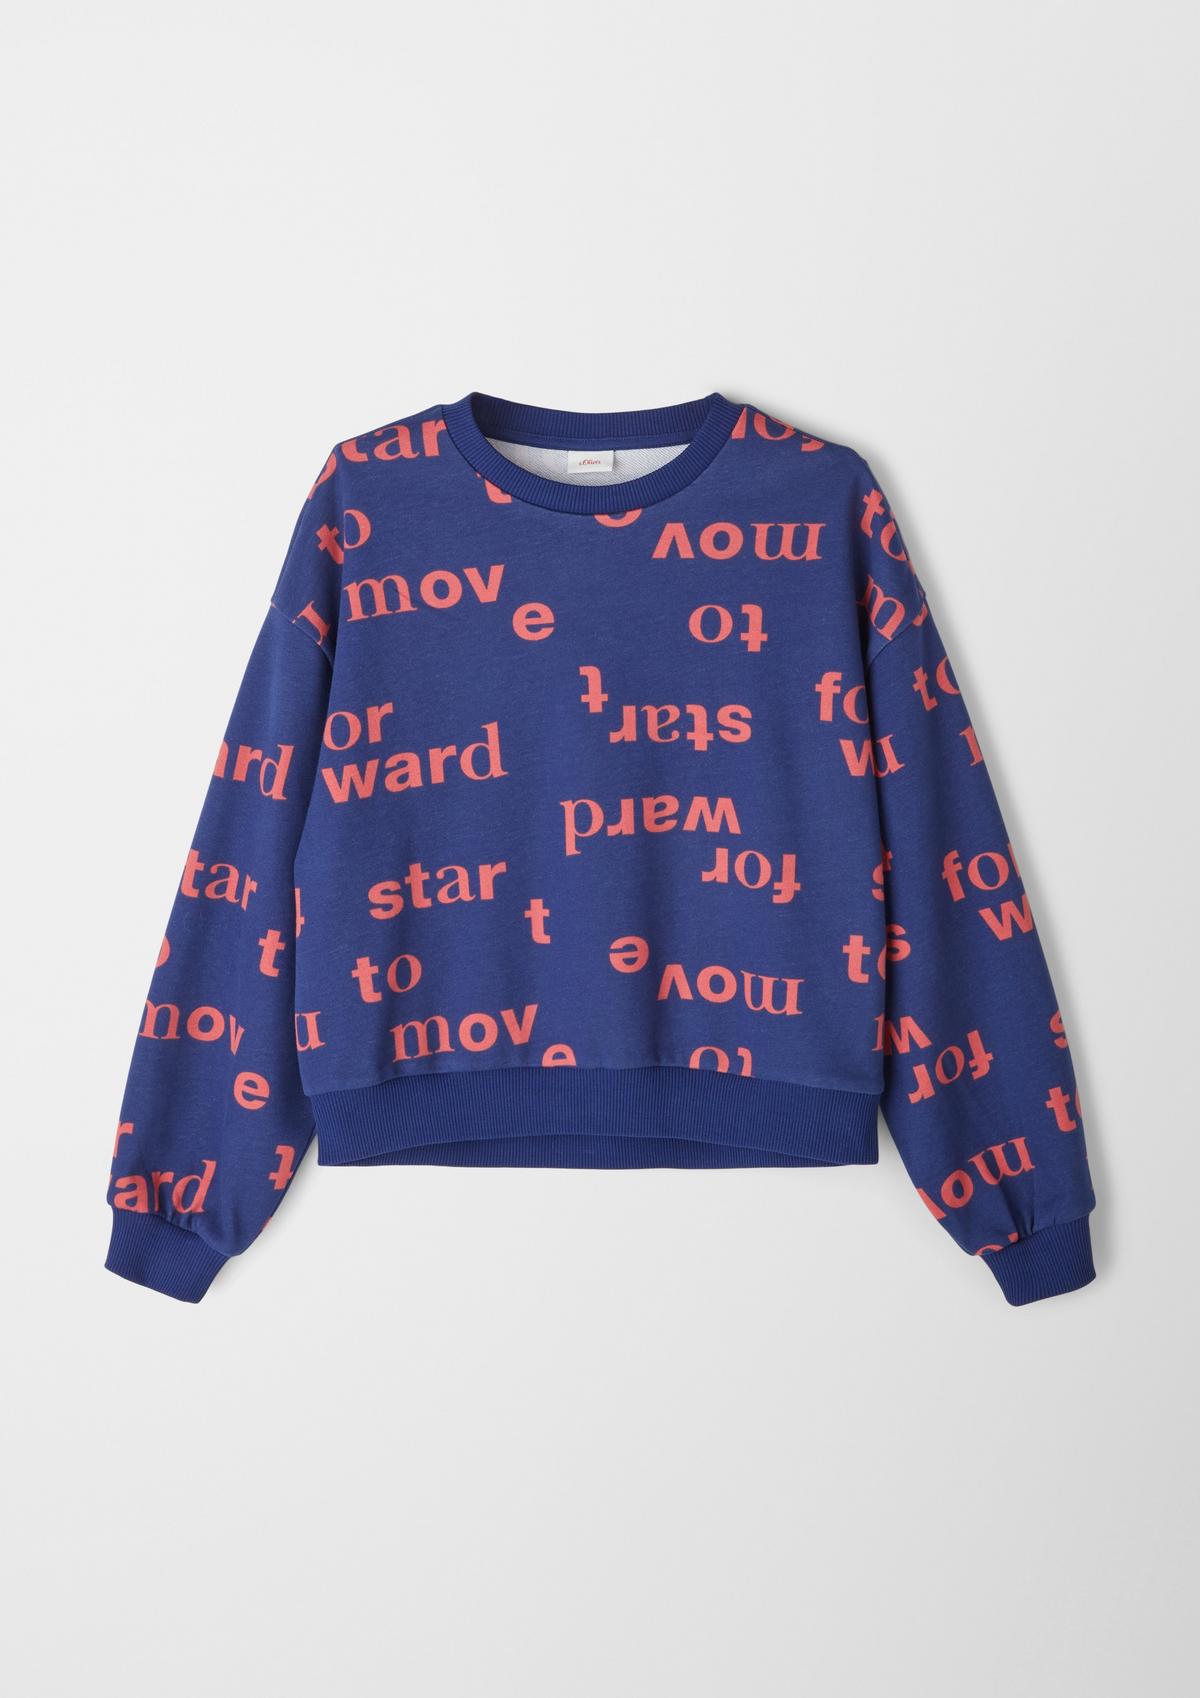 s.Oliver Sweatshirt with an all-over pattern